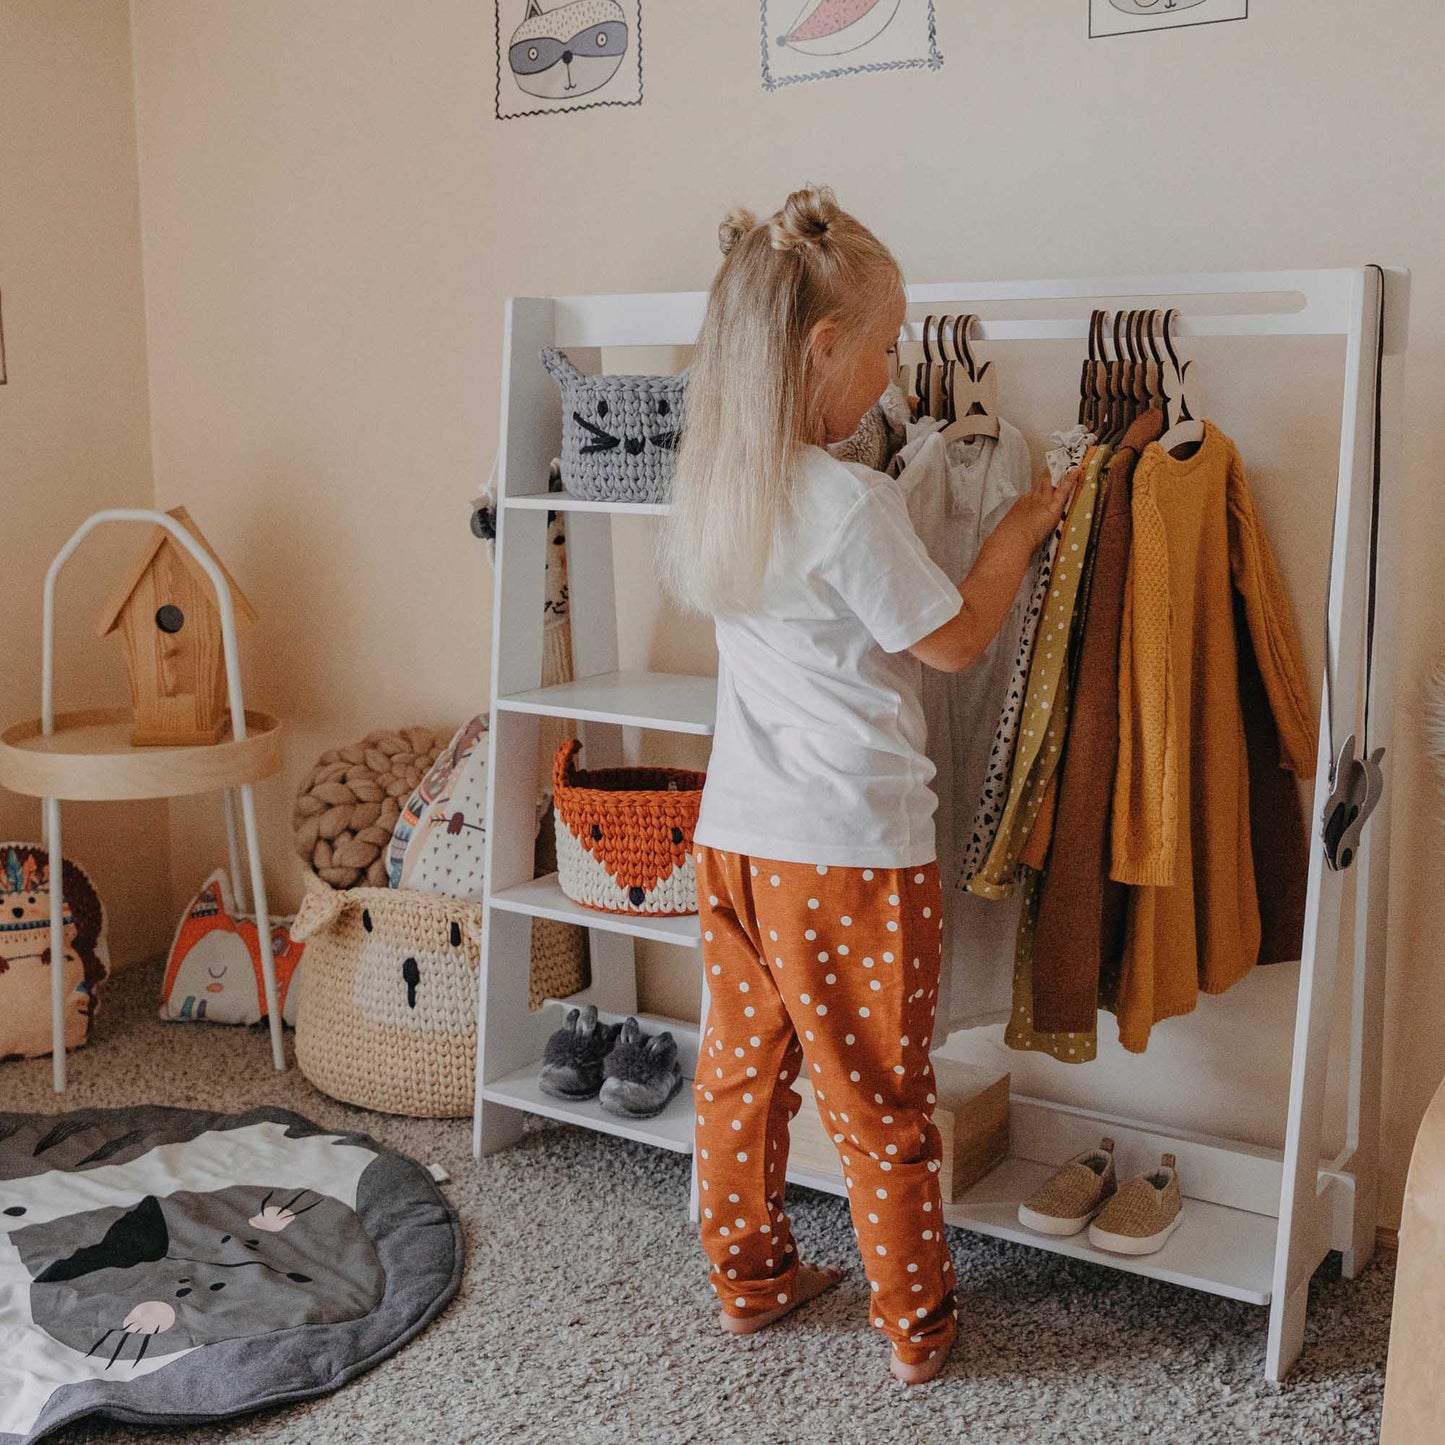 A little girl standing next to an open Sweet Home From Wood children's wardrobe in a child's room.